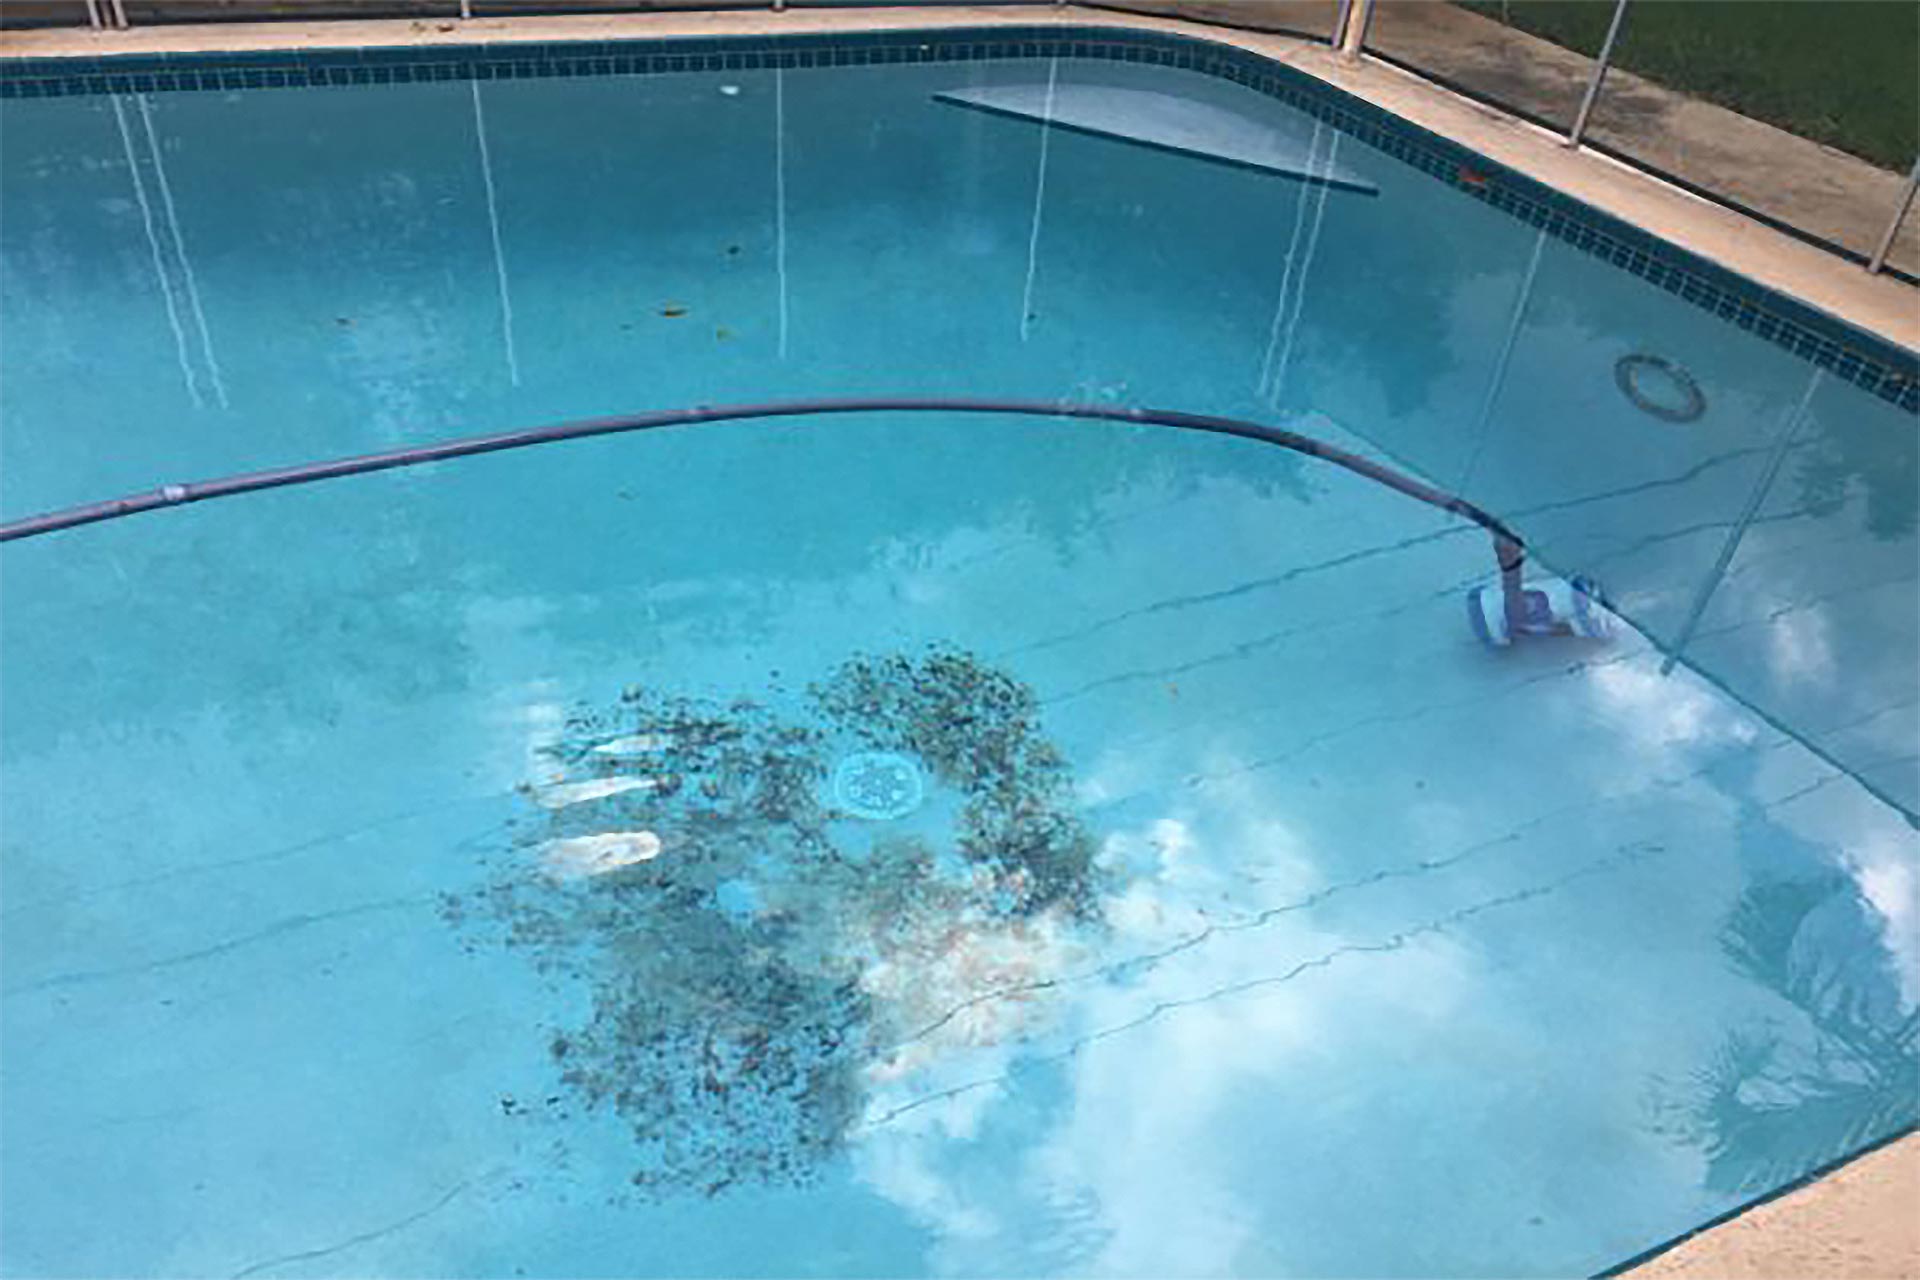 How Do You Clean A Fibreglass Pool? - Newcastle Swimming Pools How To Clean Brown Pool Water